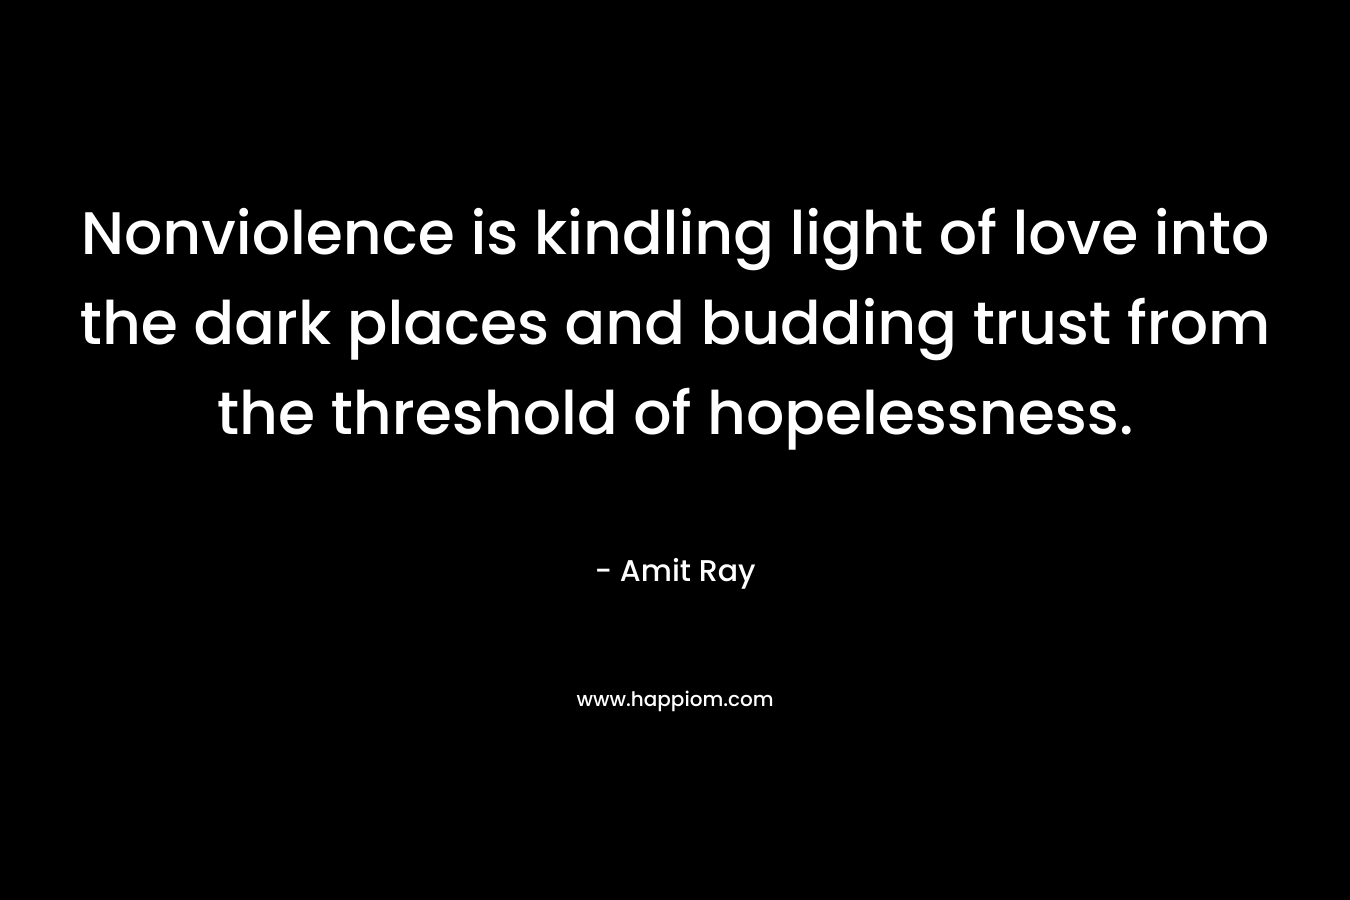 Nonviolence is kindling light of love into the dark places and budding trust from the threshold of hopelessness. – Amit Ray